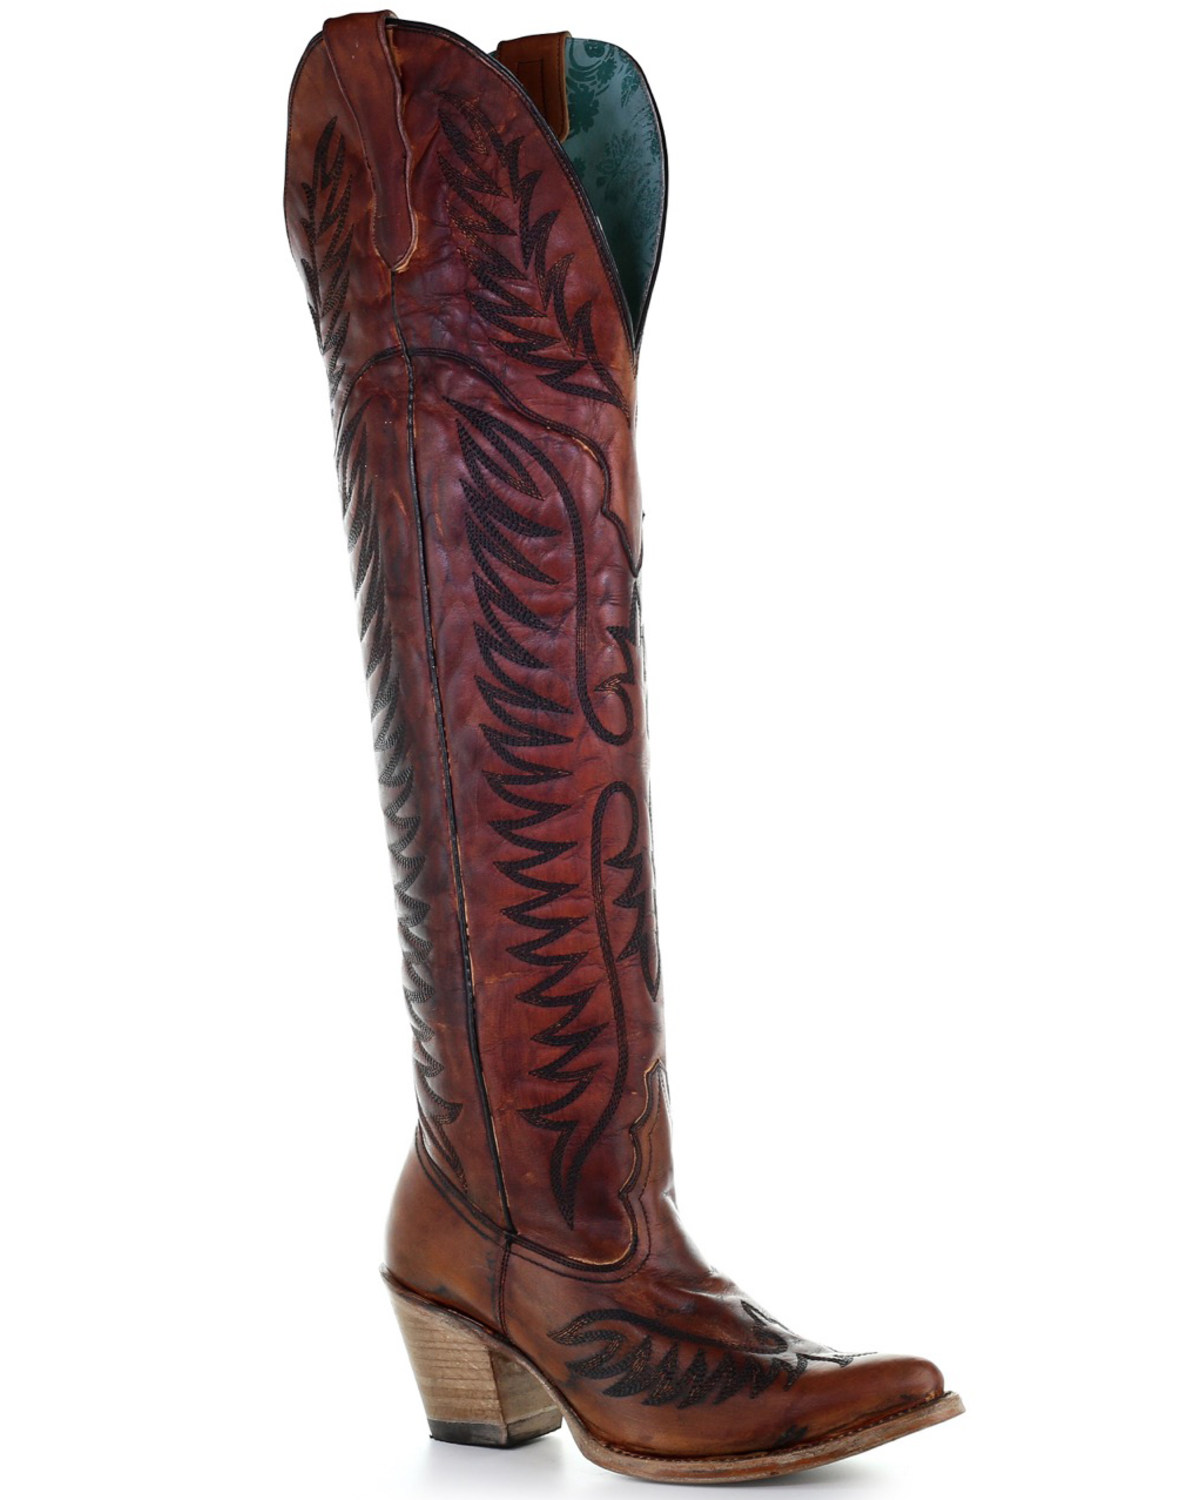 Corral Women's Leather Tall Western Boots - Pointed Toe